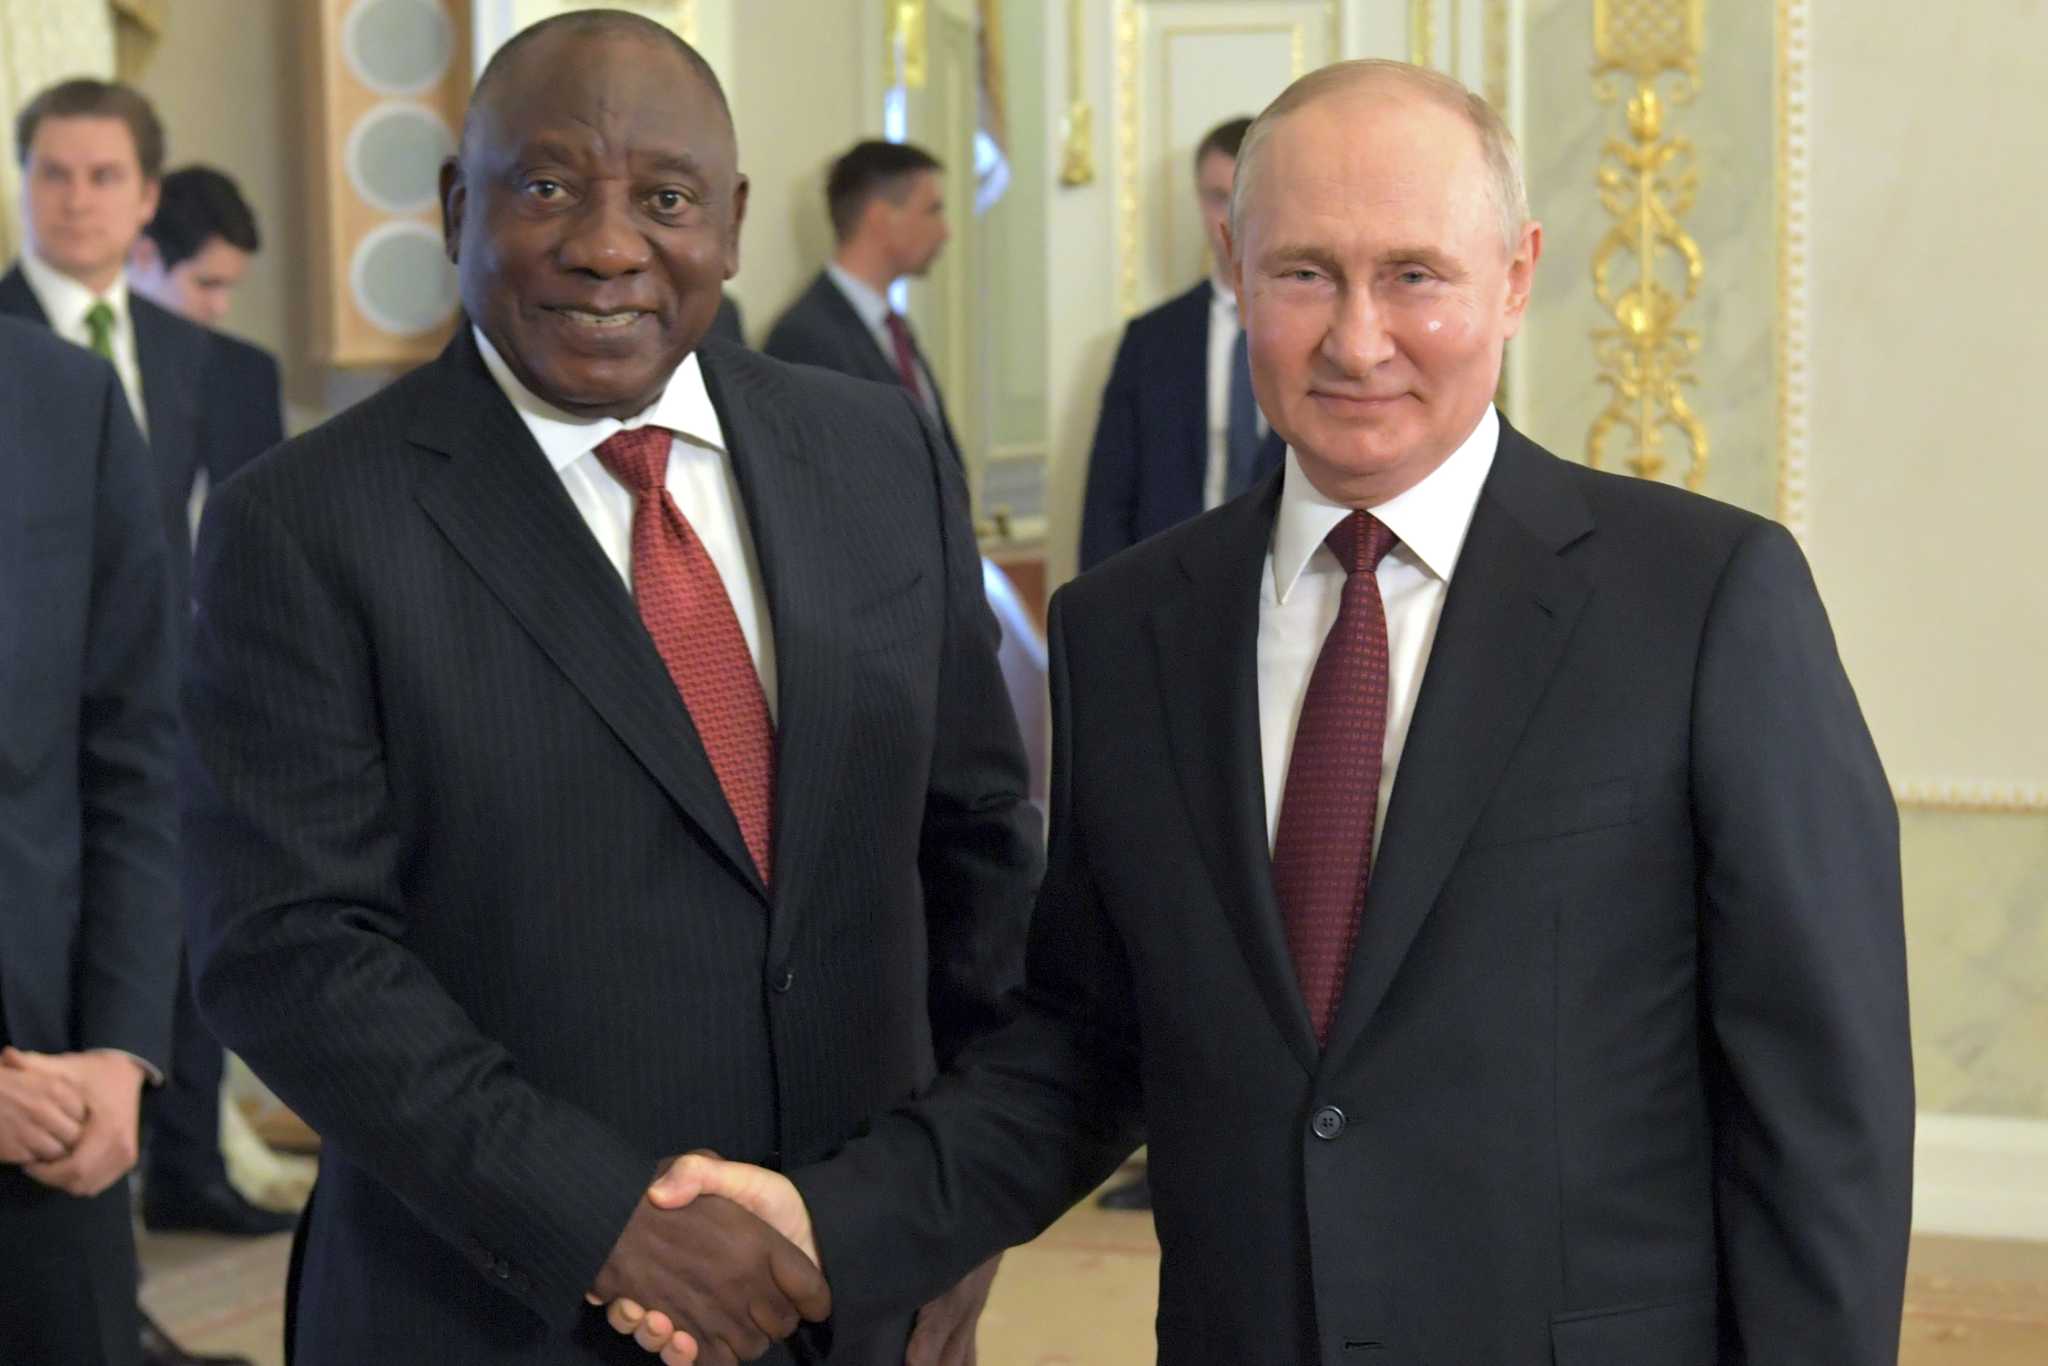 Putin Meets African Leaders with No Progress: What Does It Mean for World Peace? 21